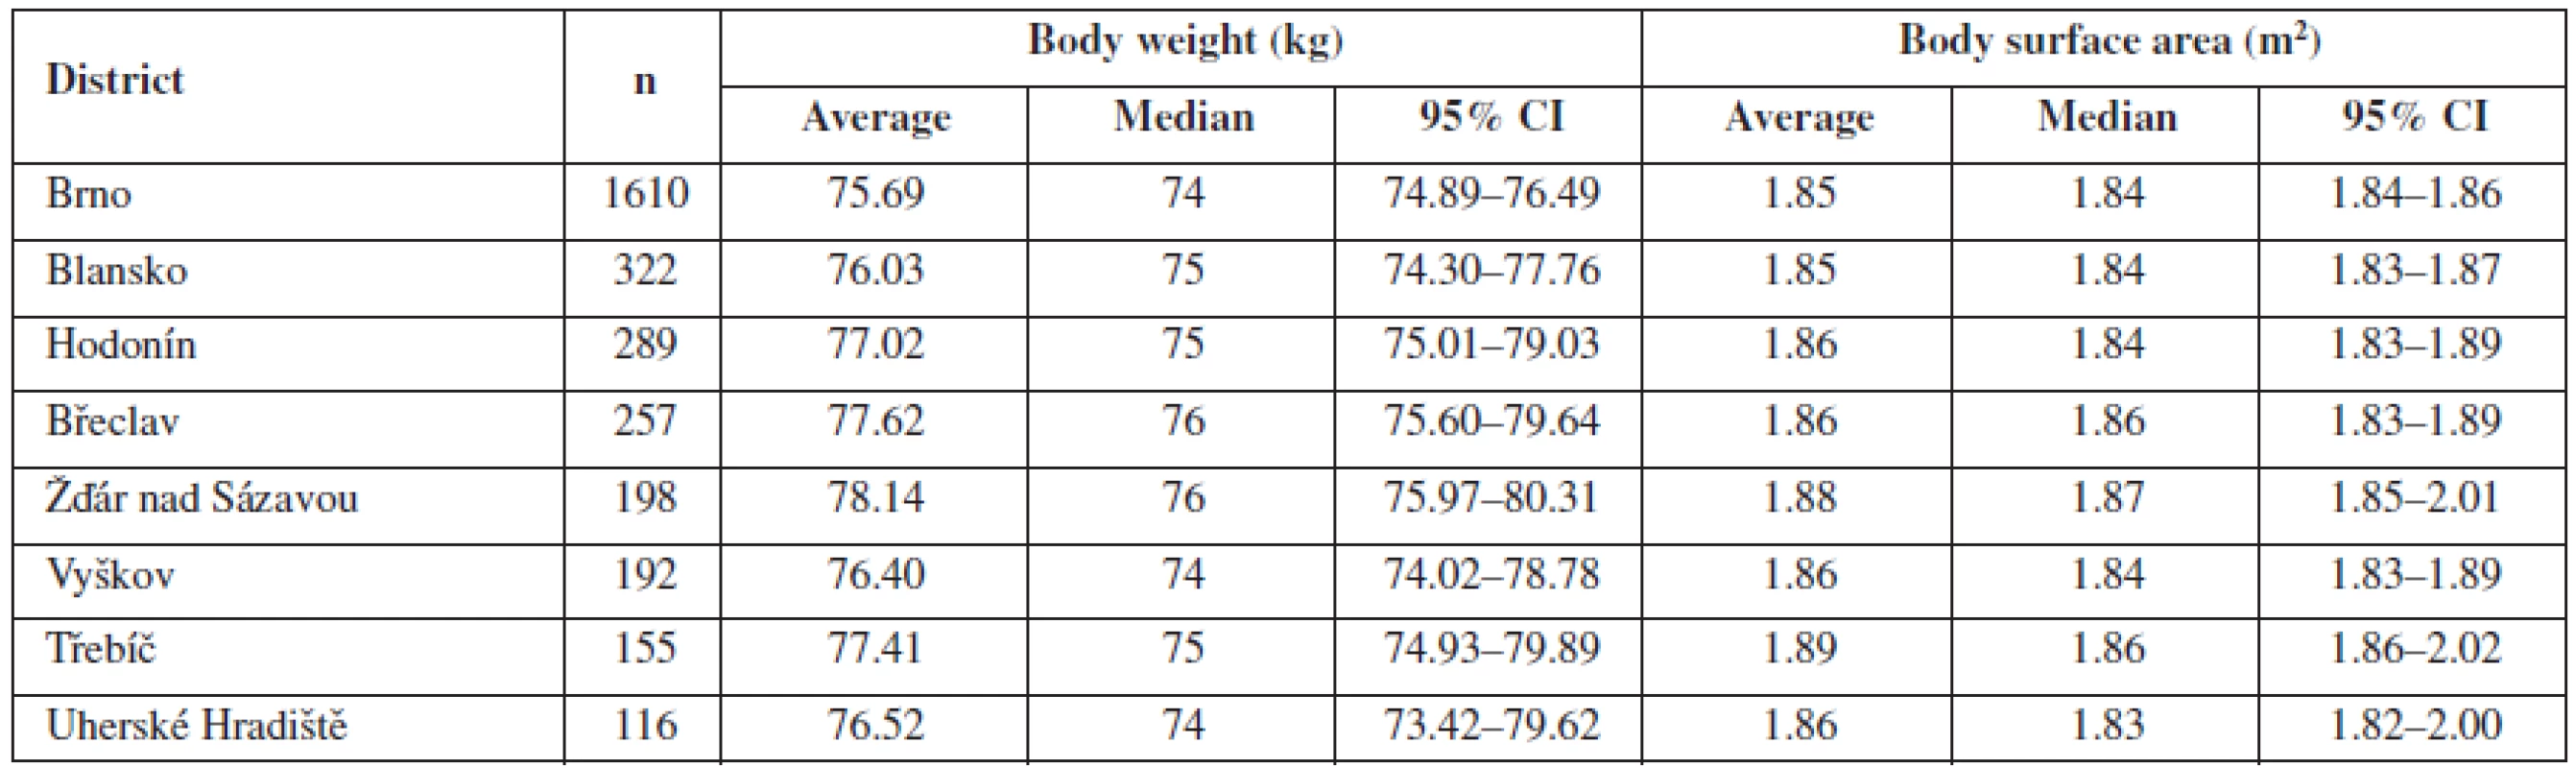 Mean body weight and mean body surface area for particular districts